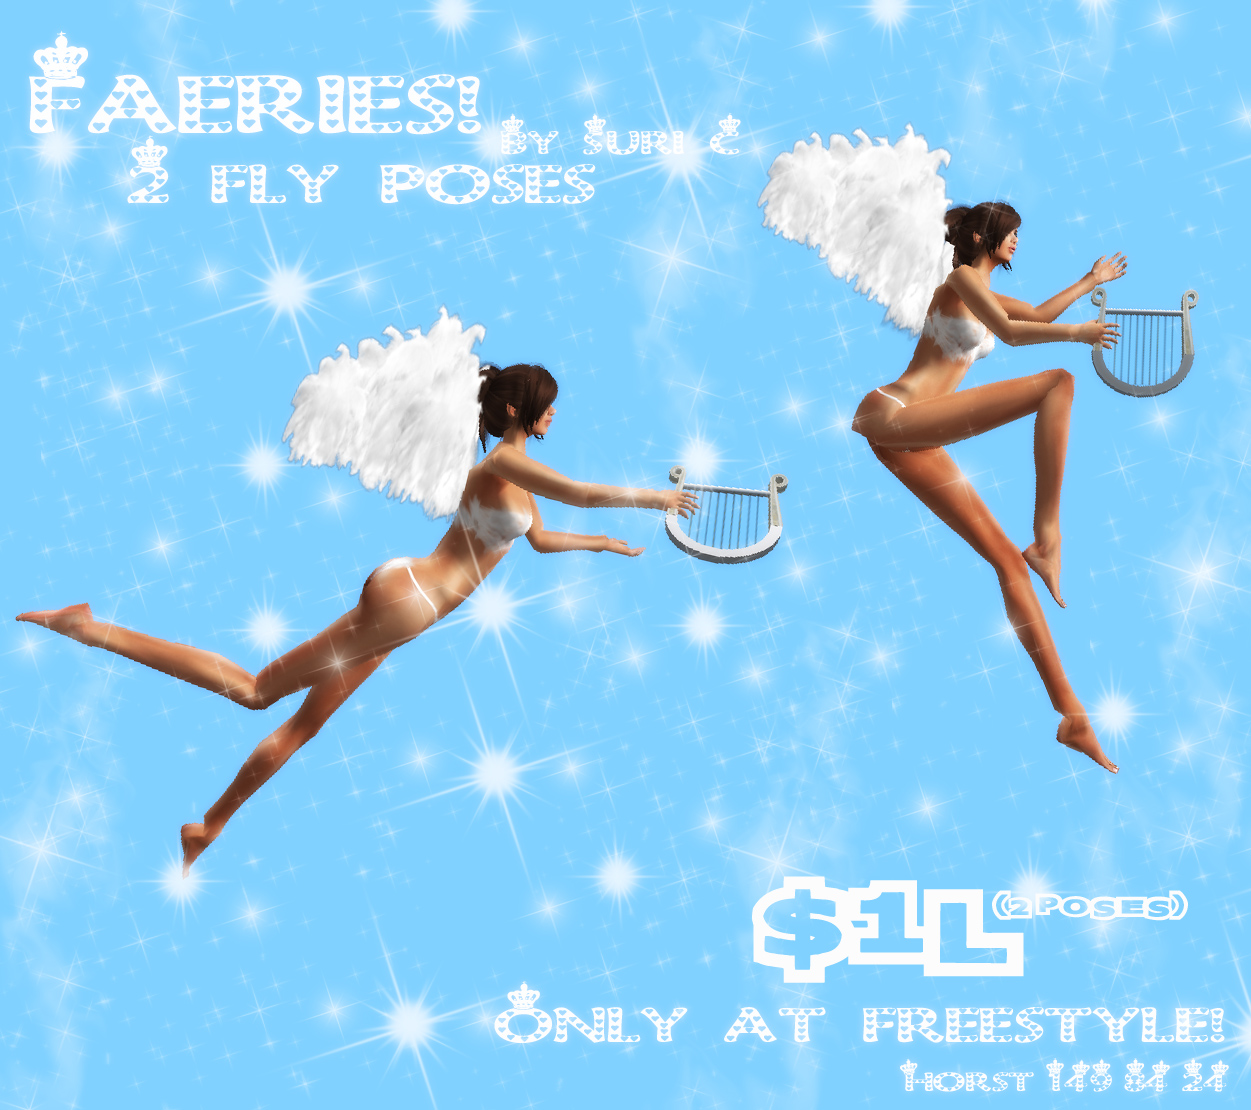 Faerie poses $1L at freestyle only